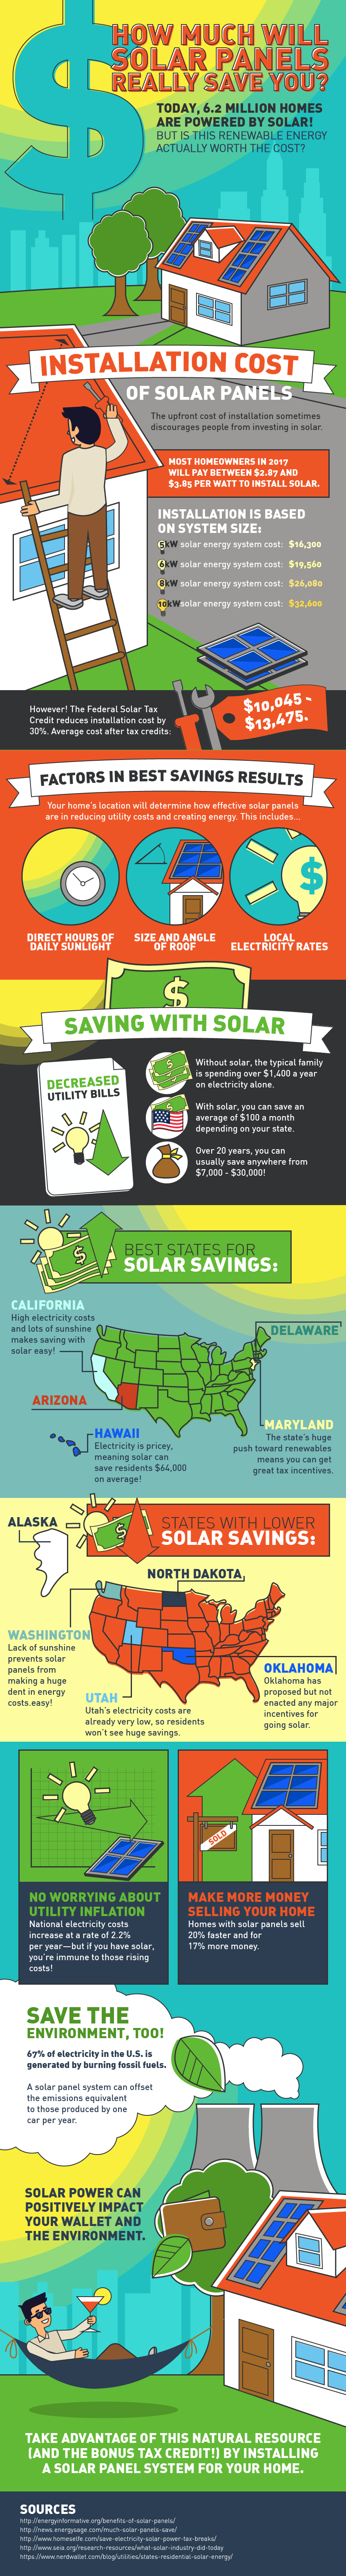 {Infographic} How Much will Solar Panels Save you?